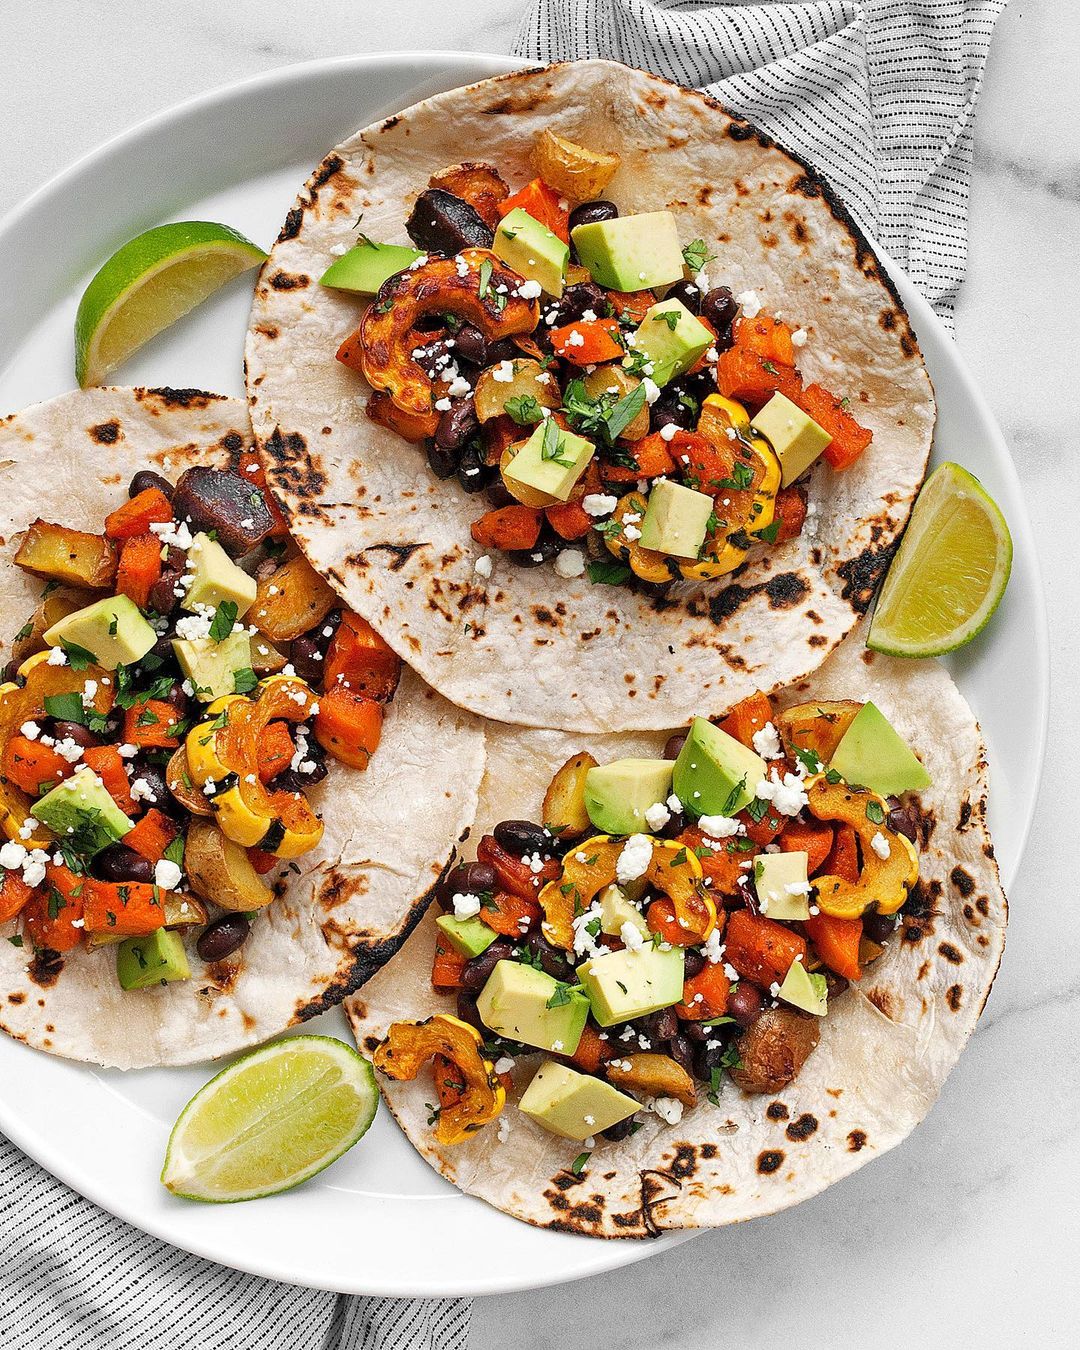 7 Soft Taco Recipes to Make You Feel like Youre on a Mexican Vacay ...